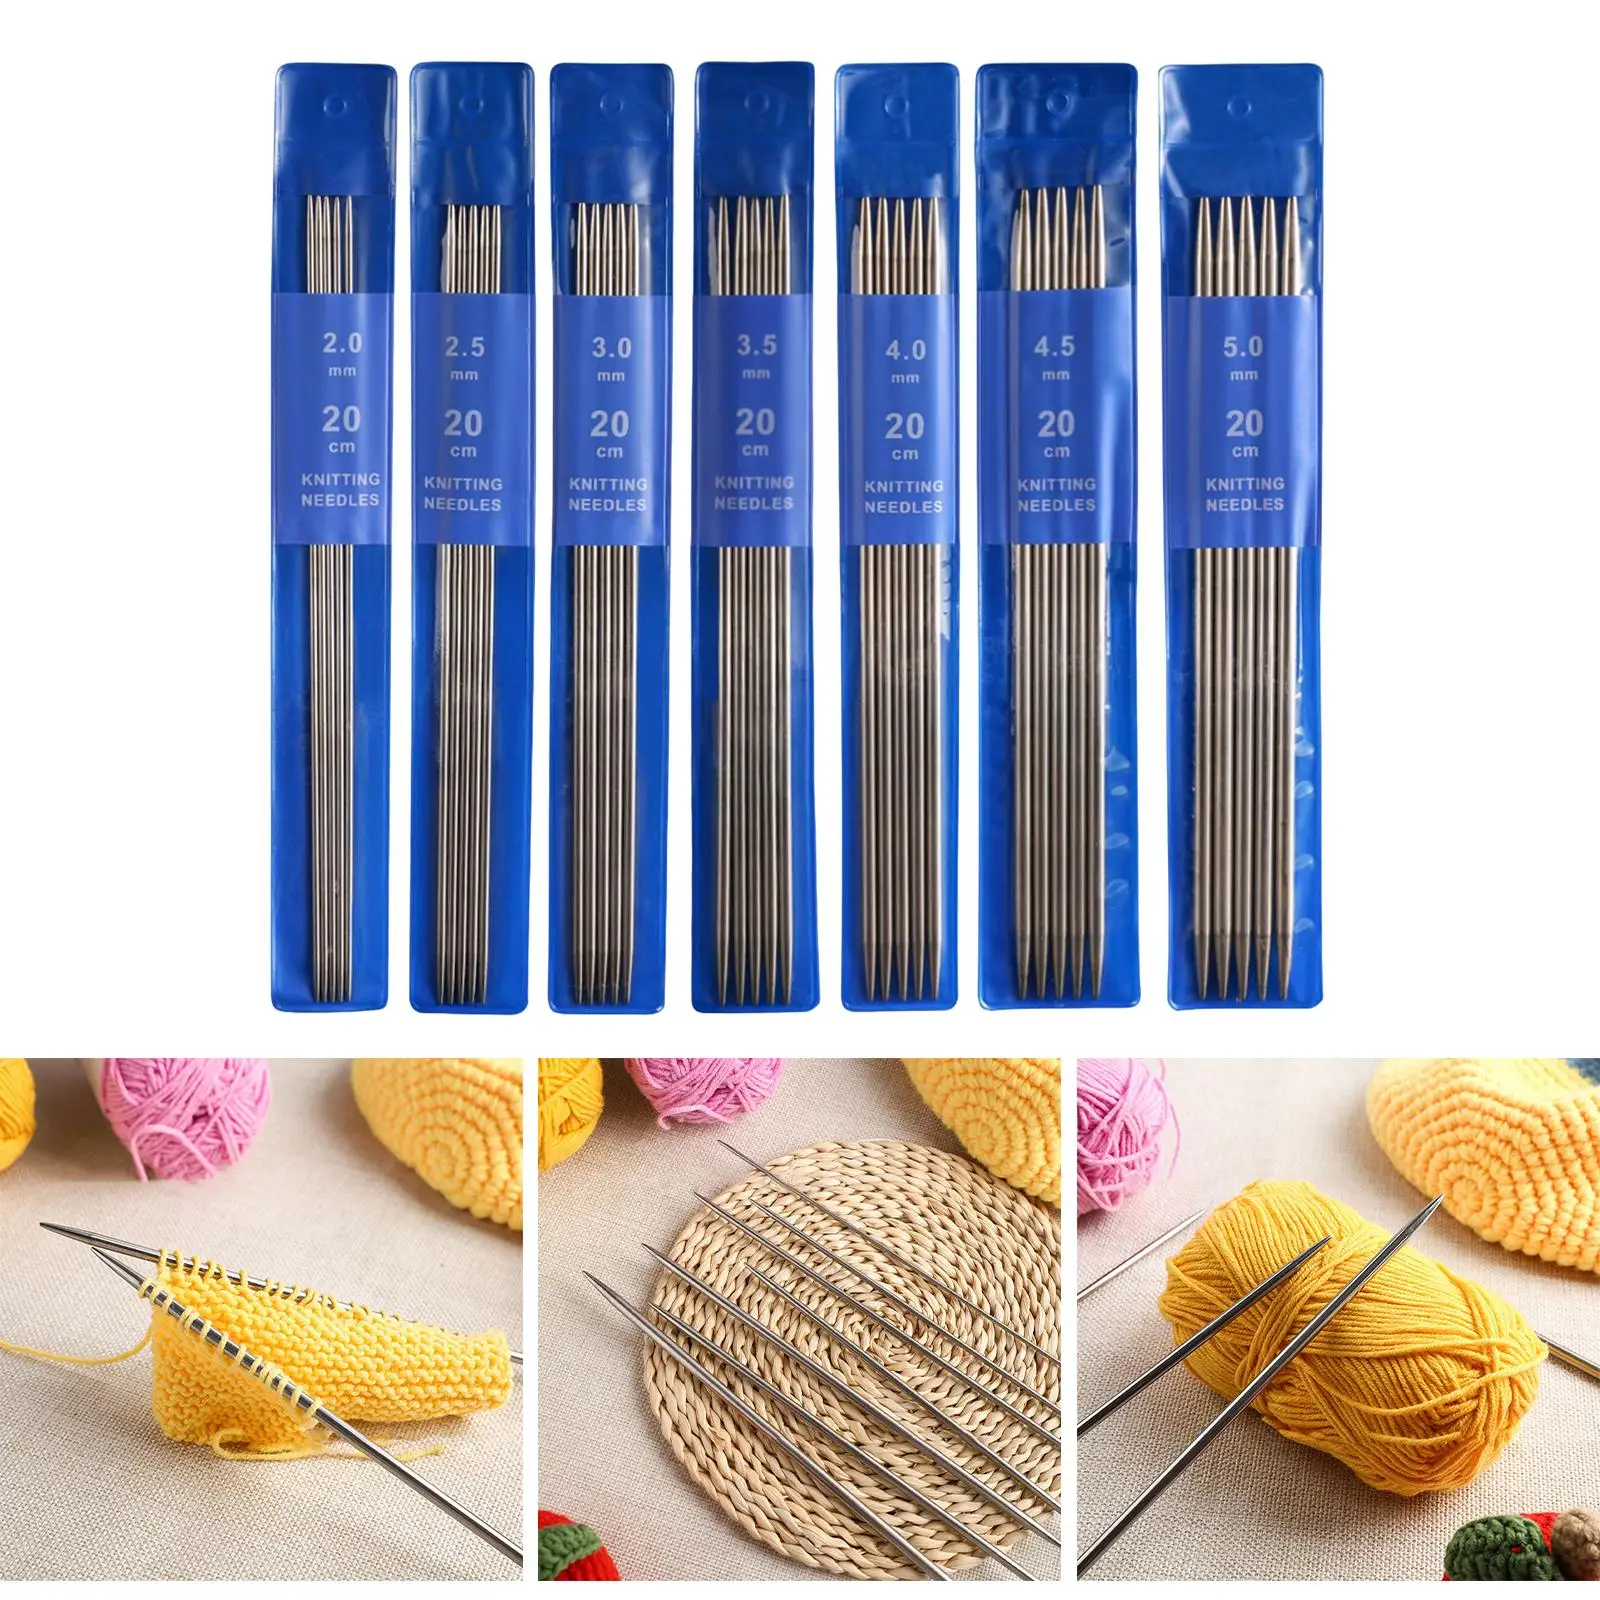 35Pcs Stainless Steel Knitting Needles Set Sewing Smooth Needle 20cm Length Quilting Needles Stitch Crochet DIY Tools Equipment